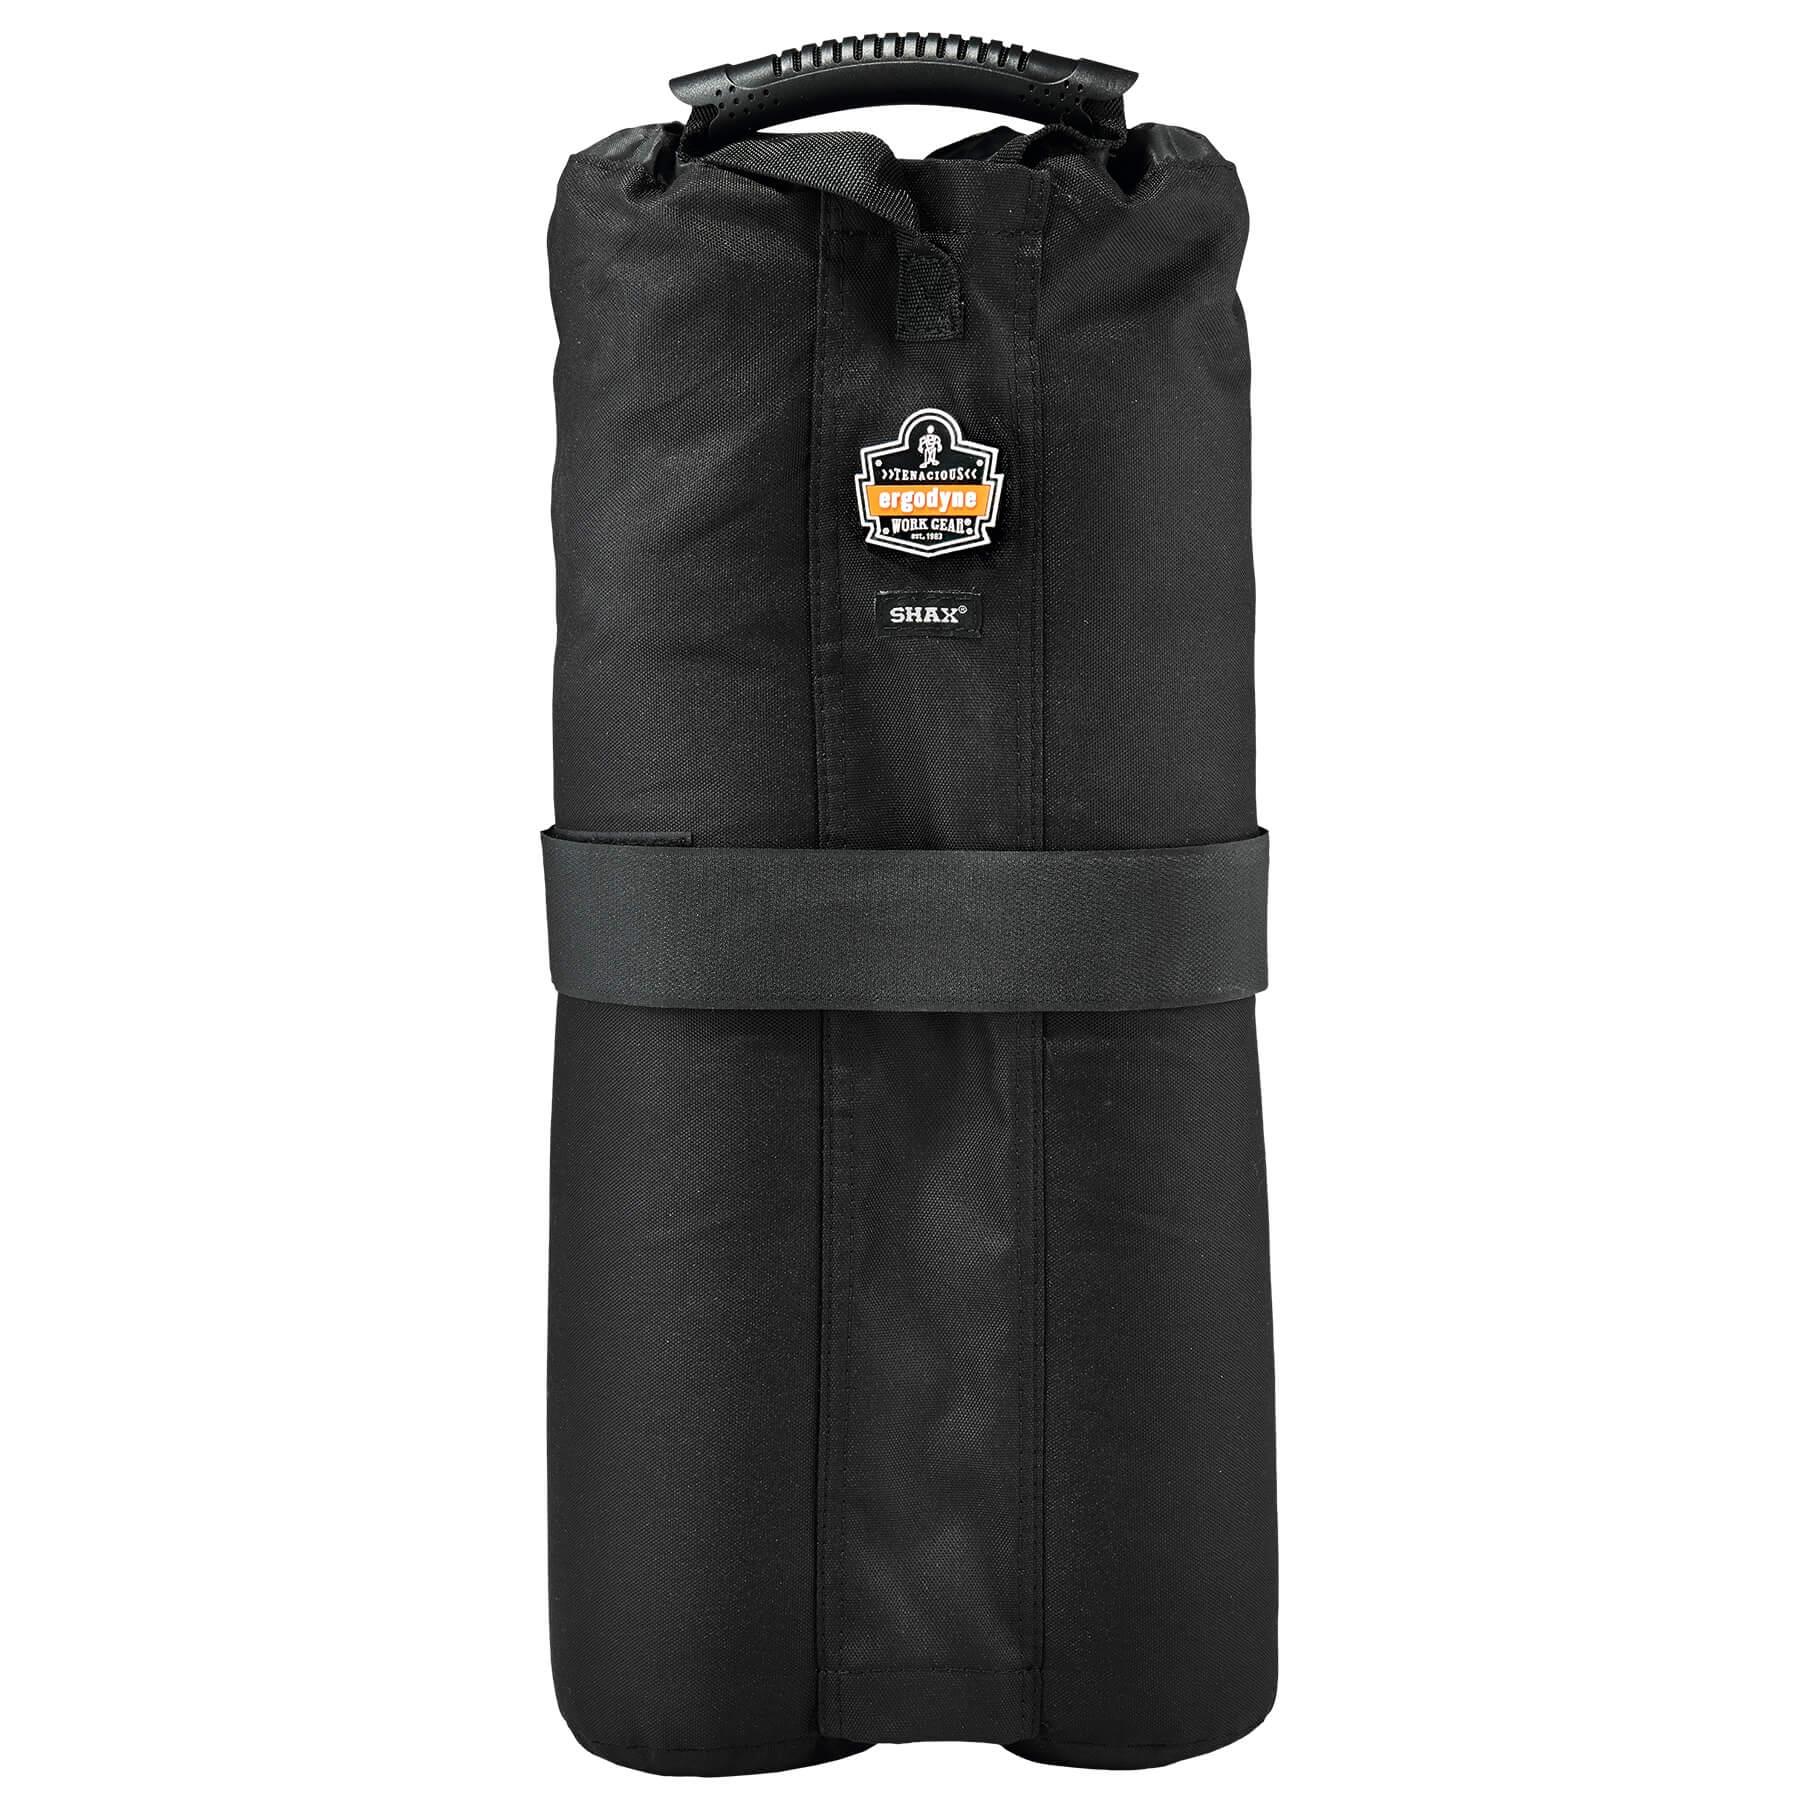 SHAX 6094 TENT WEIGHT BAGS SET OF 2 - Shax